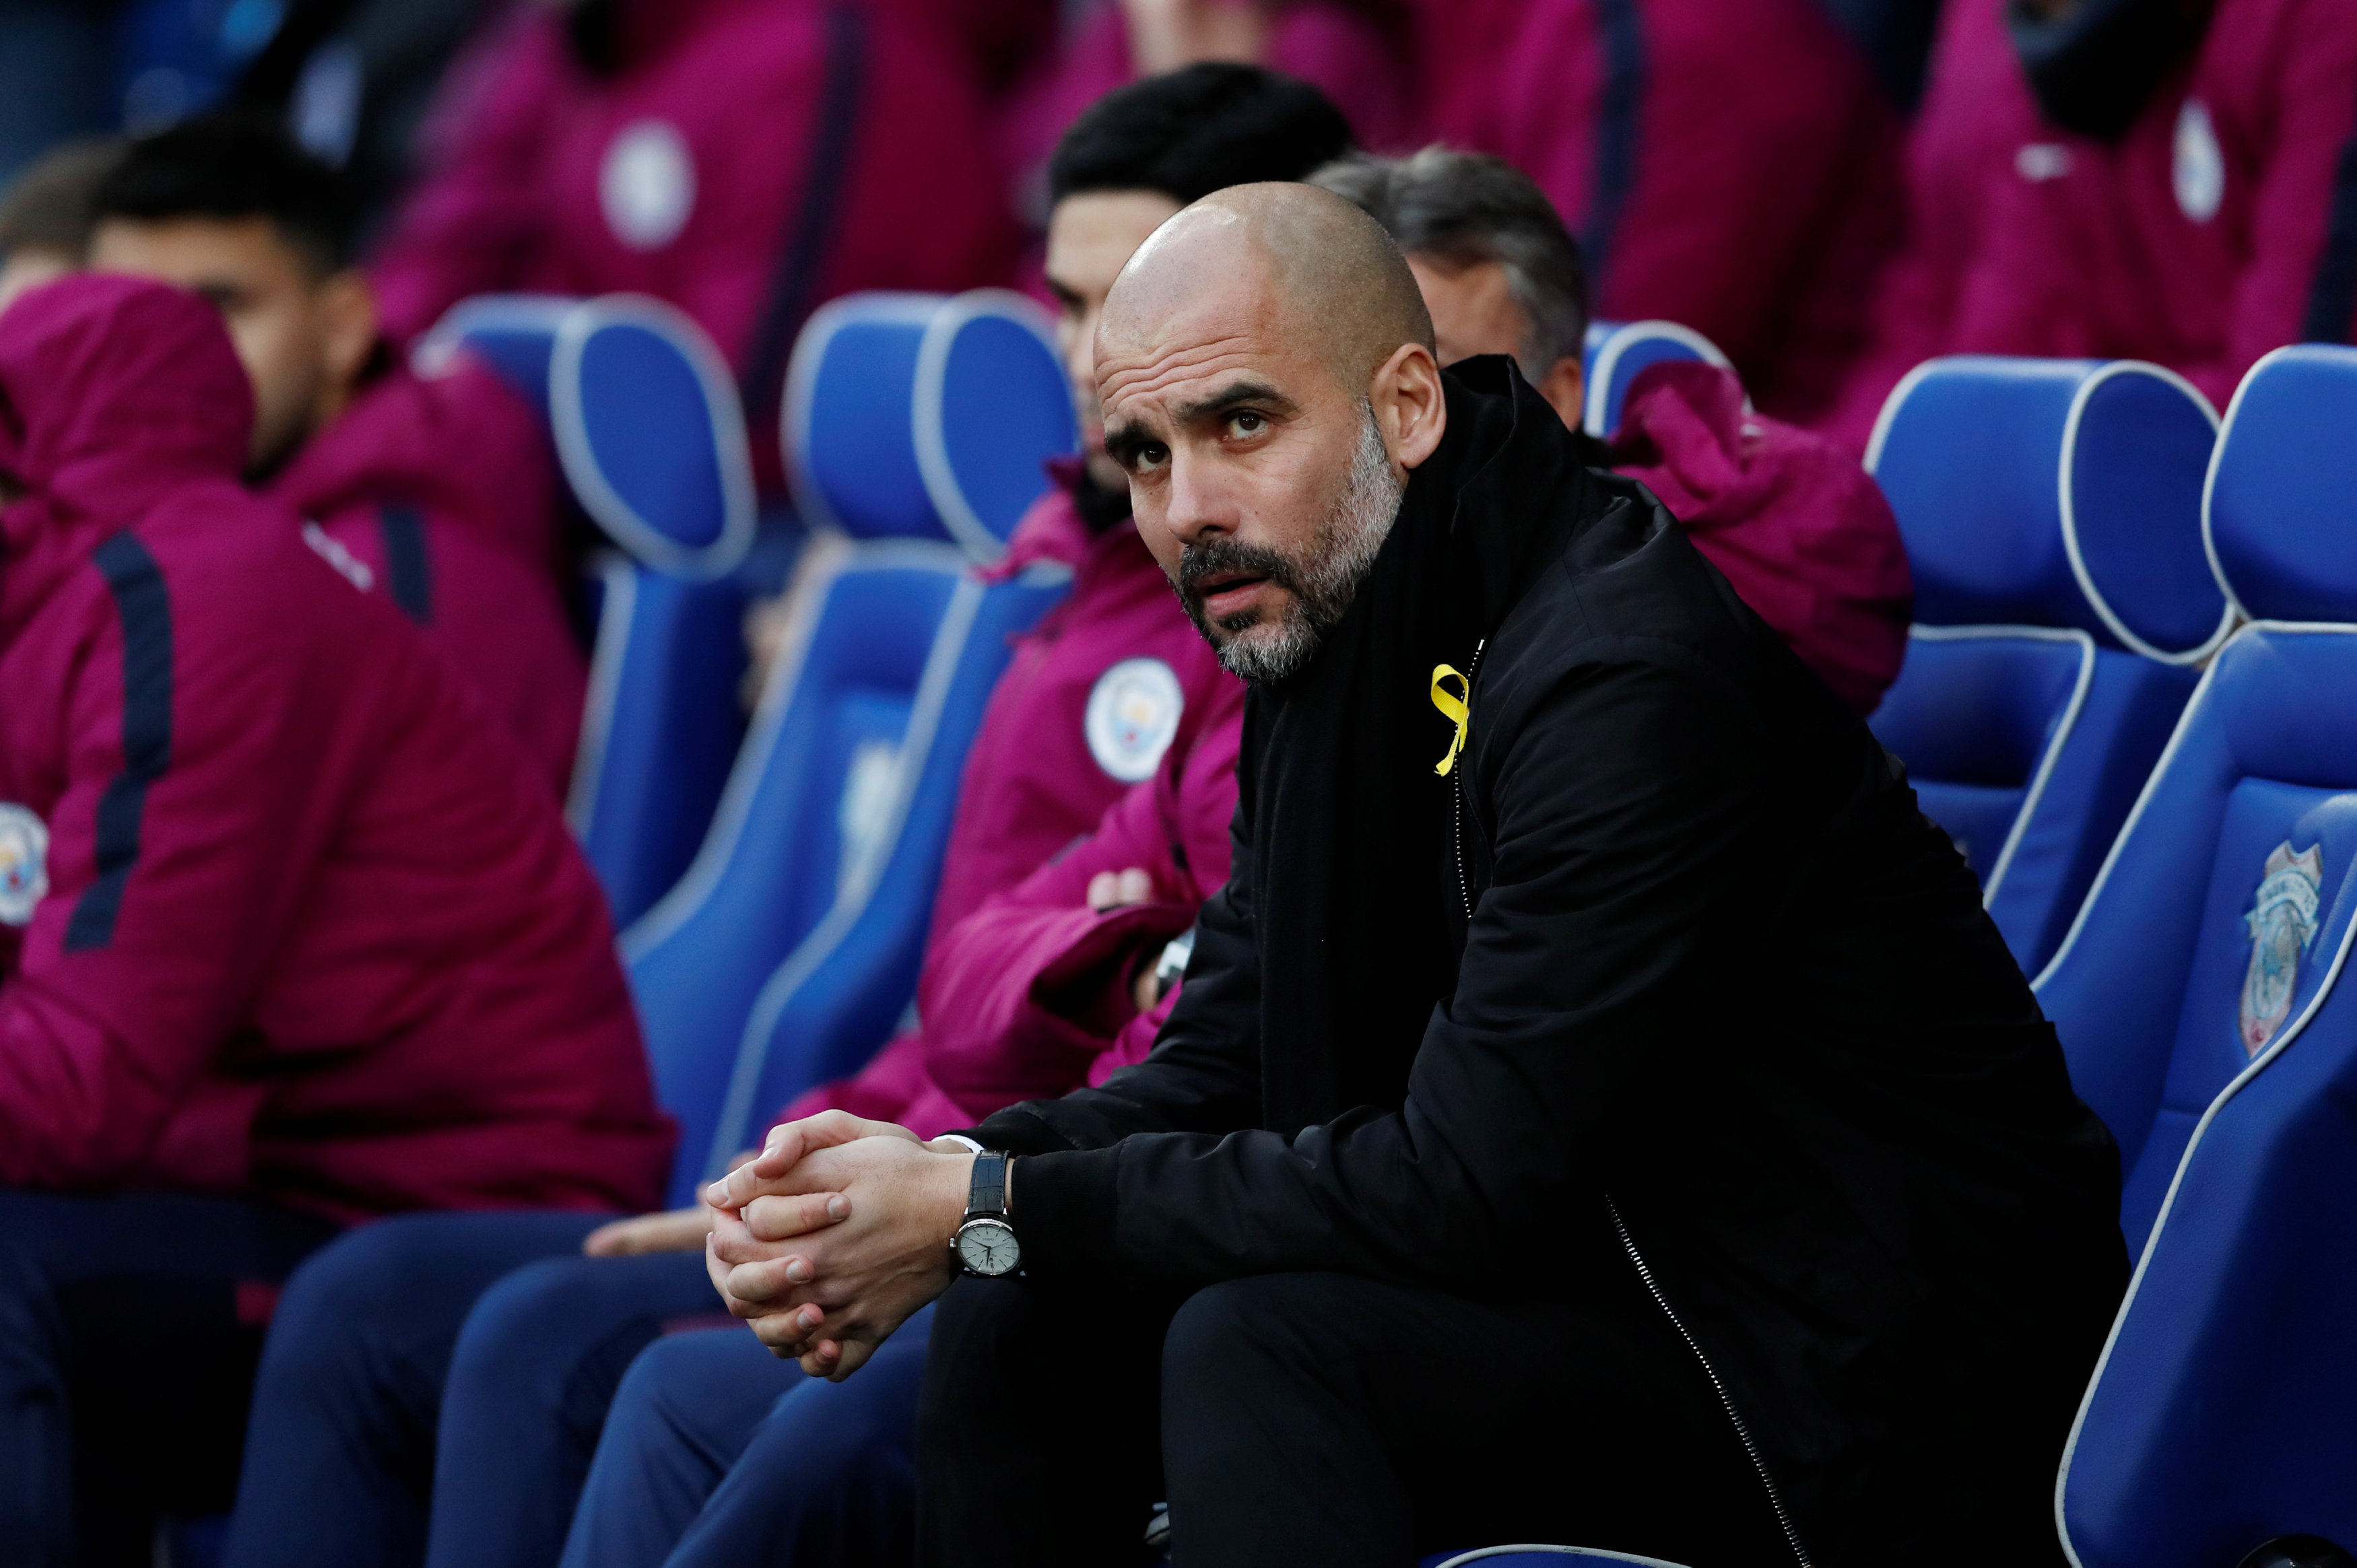 Football coach Pep Guardiola wearing a yellow ribbon (by Reuters/Andrew Boyers)